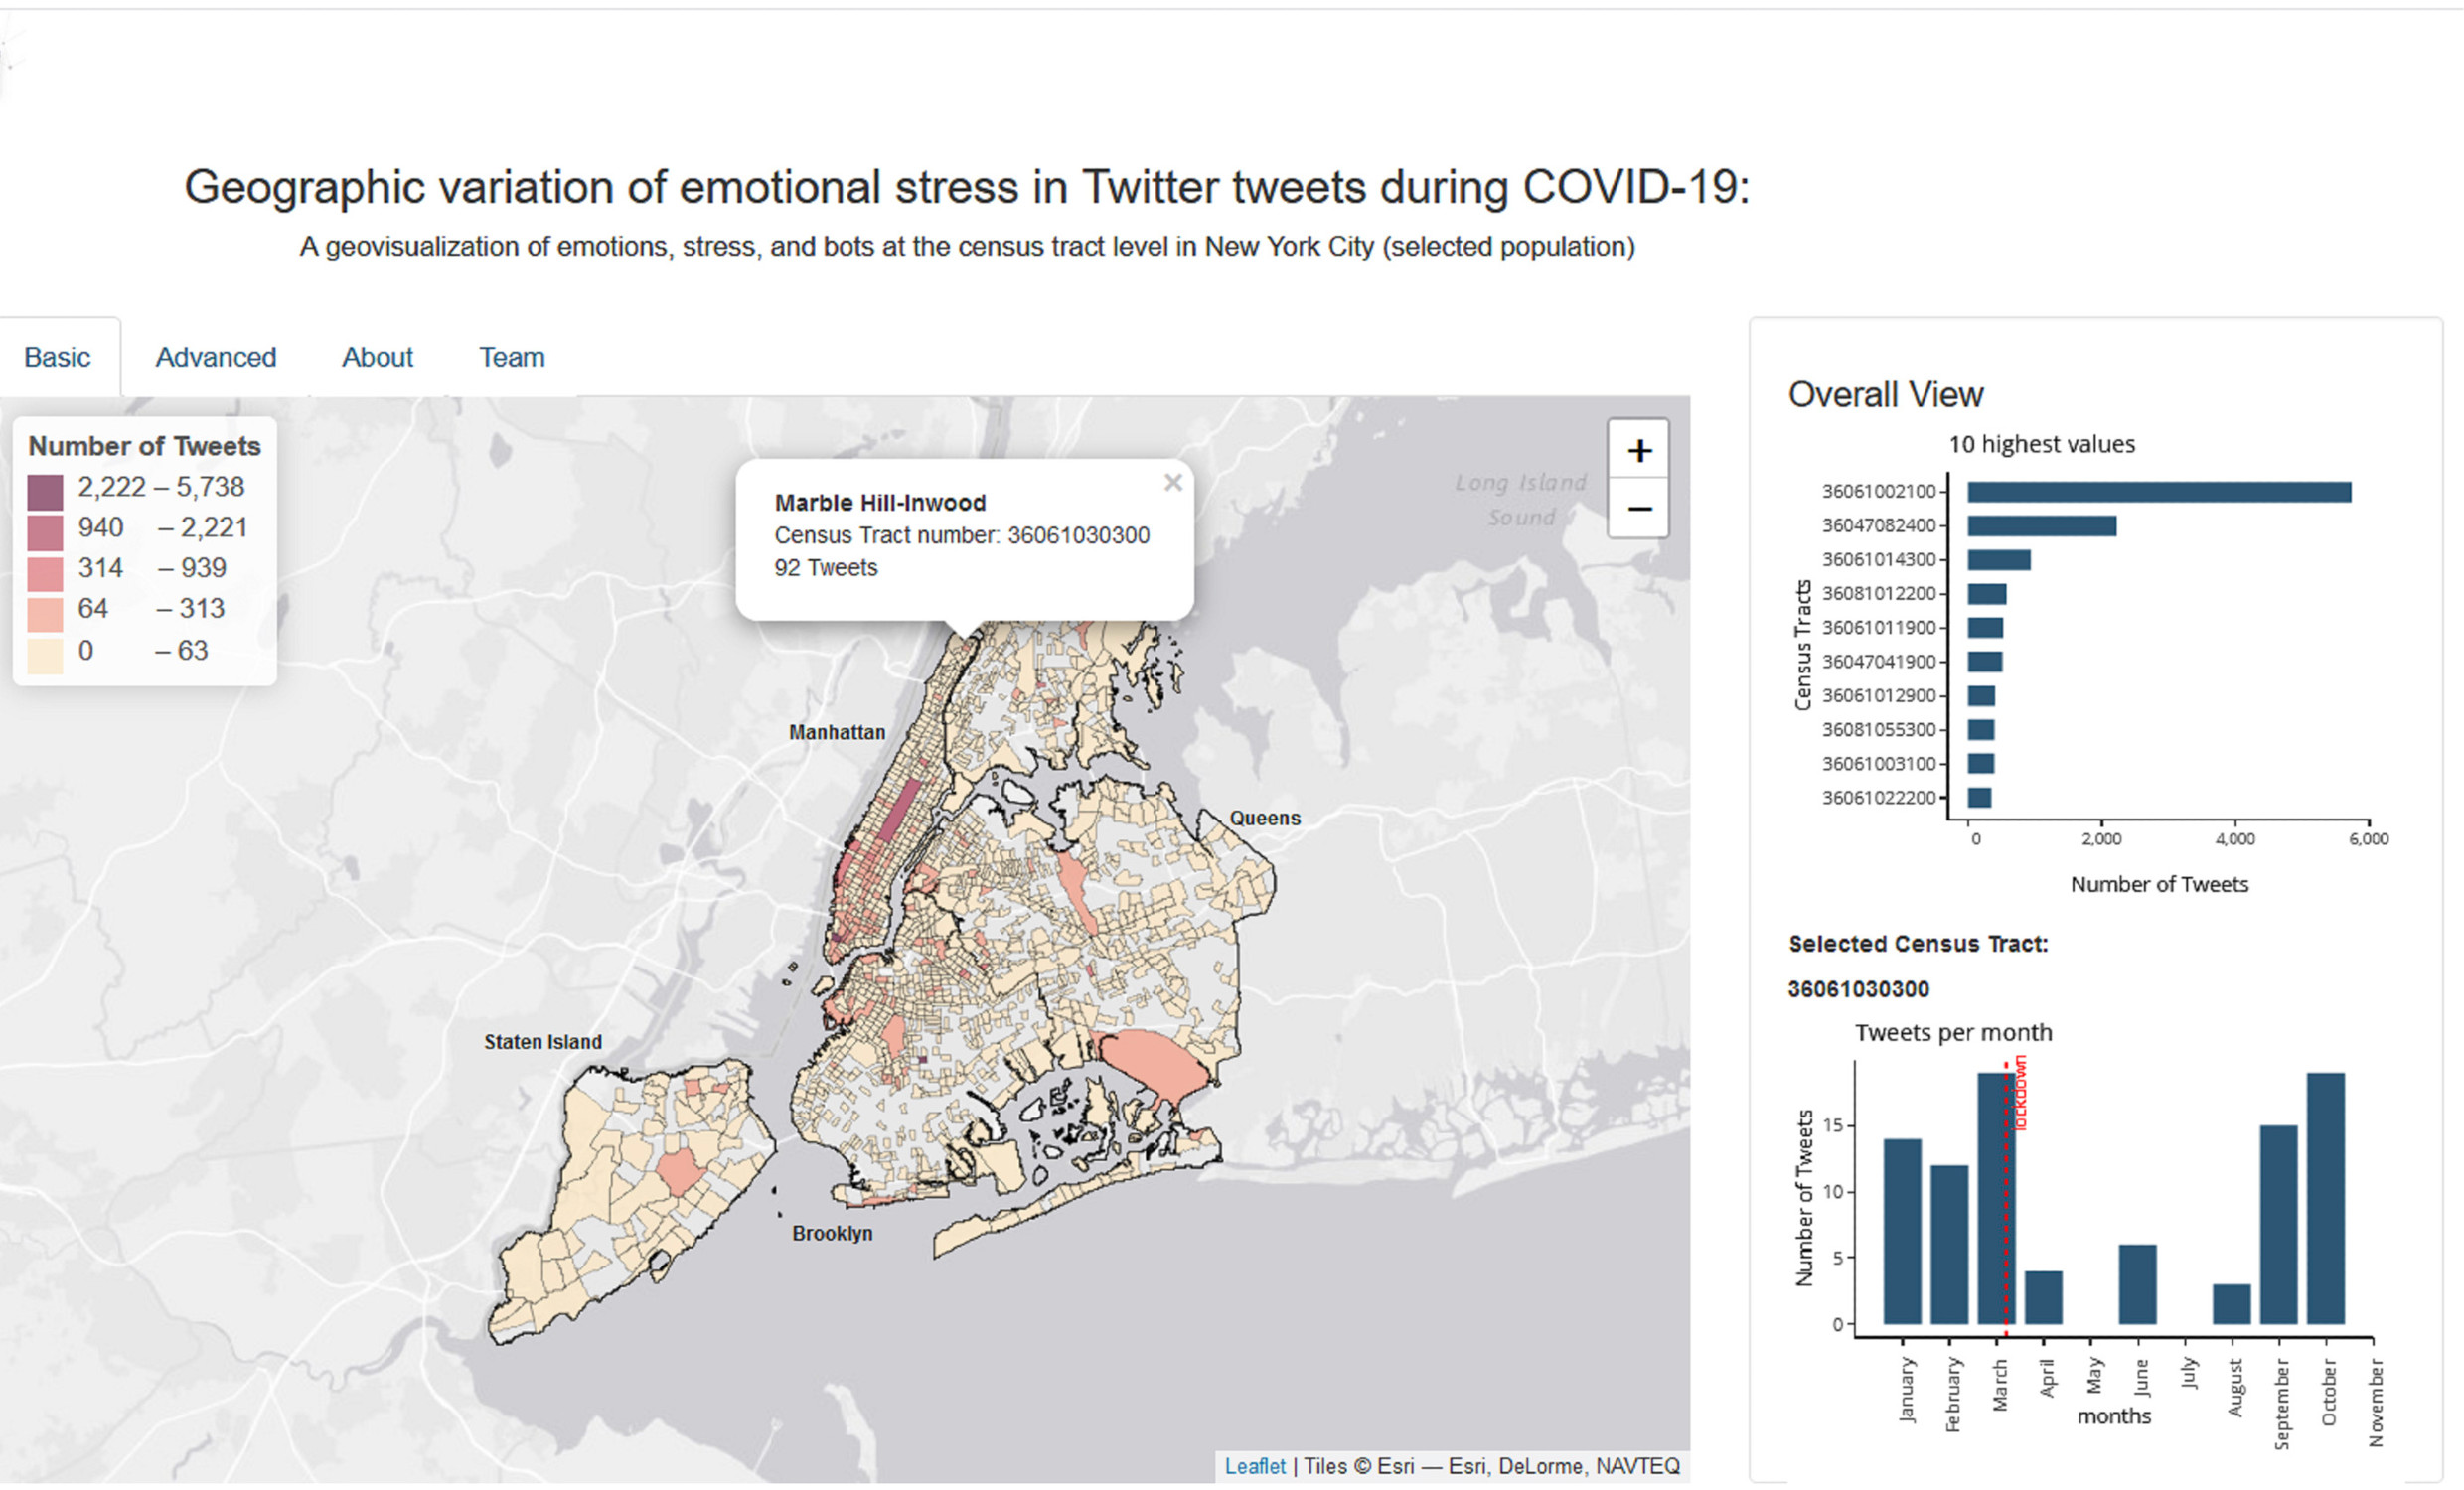 Real-time geospatial surveillance of localized emotional stress responses to COVID-19: a proof of concept analysis